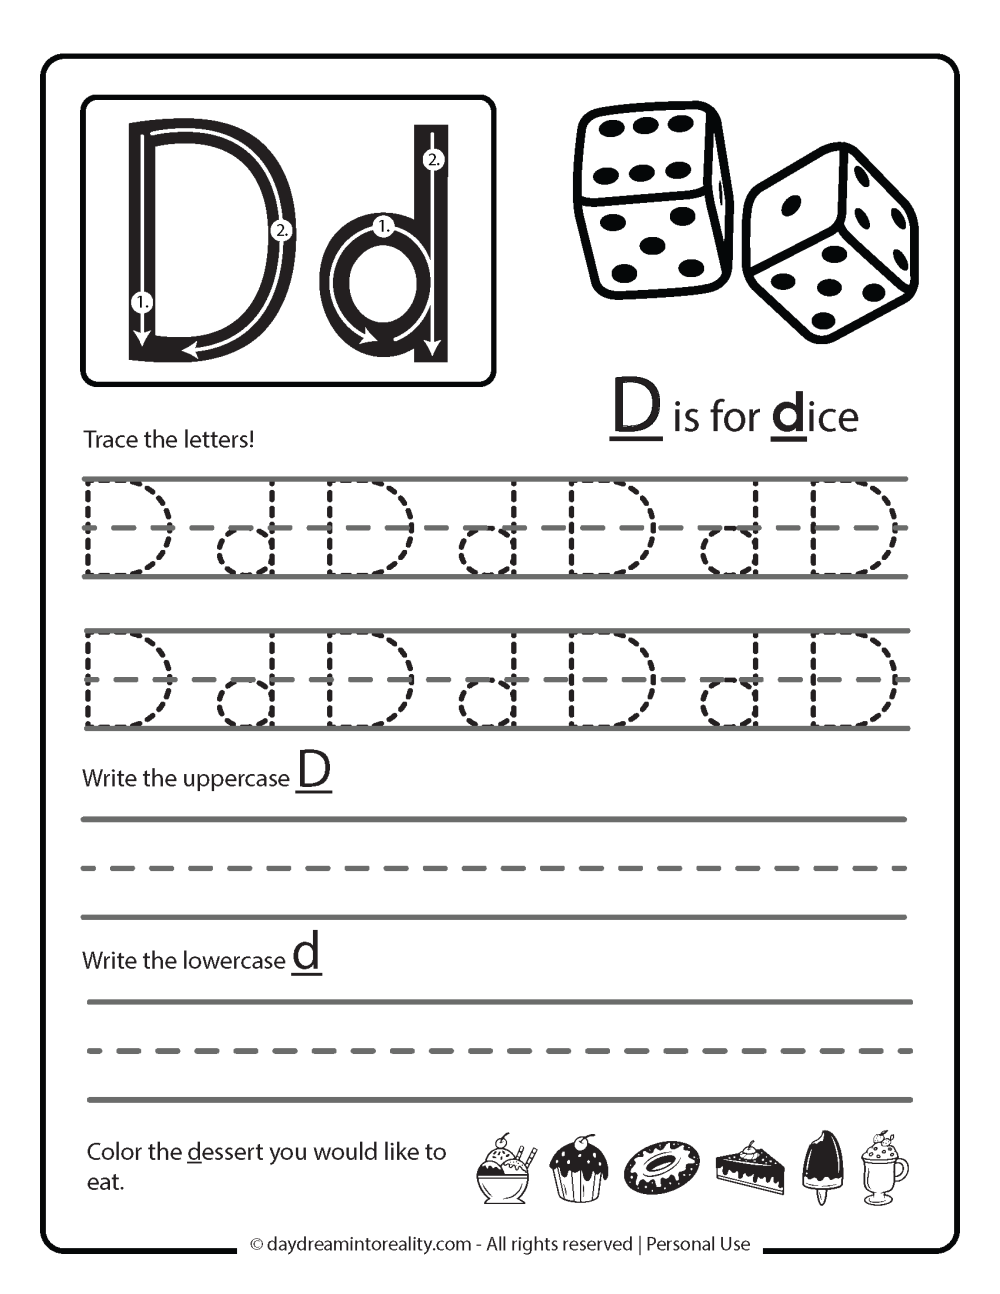 Letter D worksheet free printables - writing practice - d is for dice